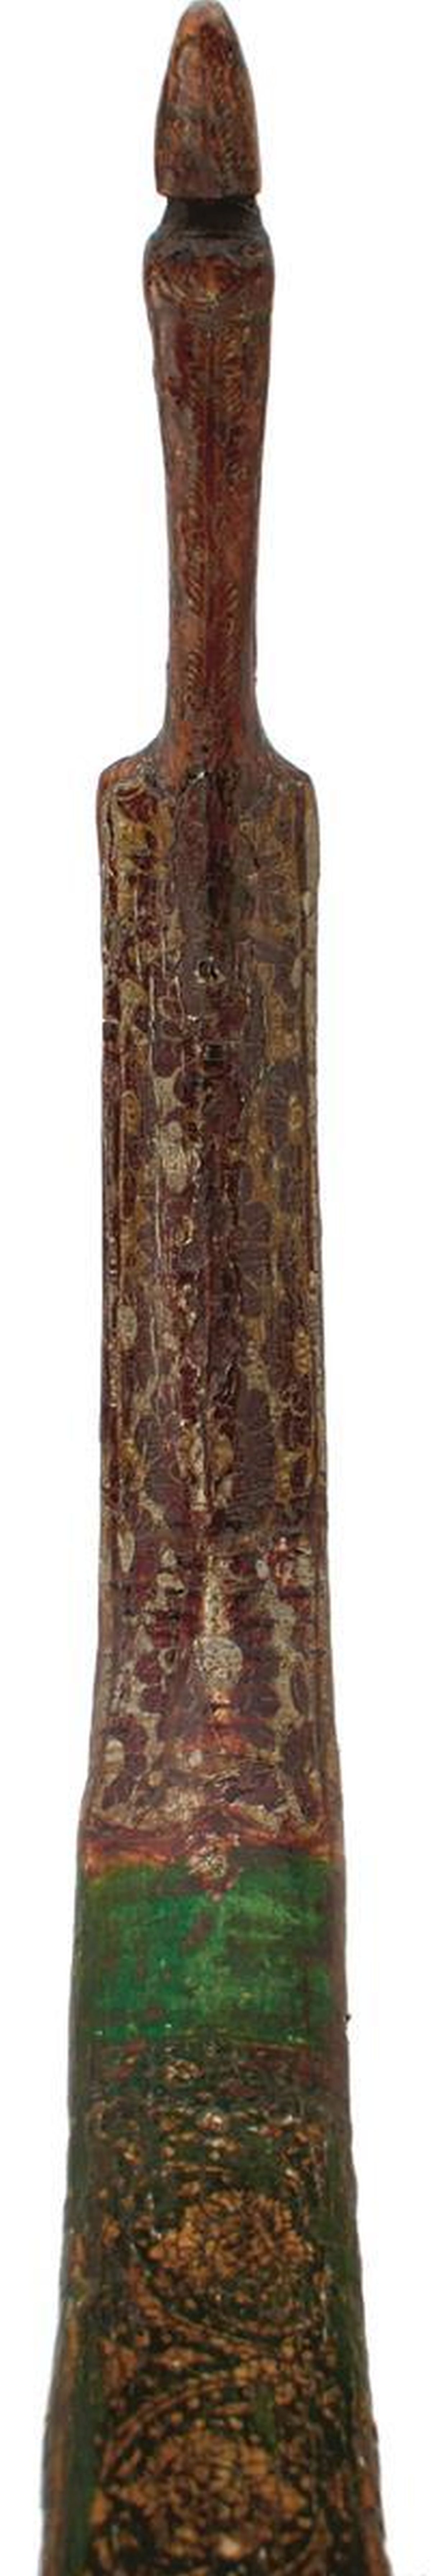 A LATE 18TH CENTURY INDIAN MUGHAL PERIOD LACQUERED WOODEN BOW, of characteristic recurved form, - Image 3 of 13